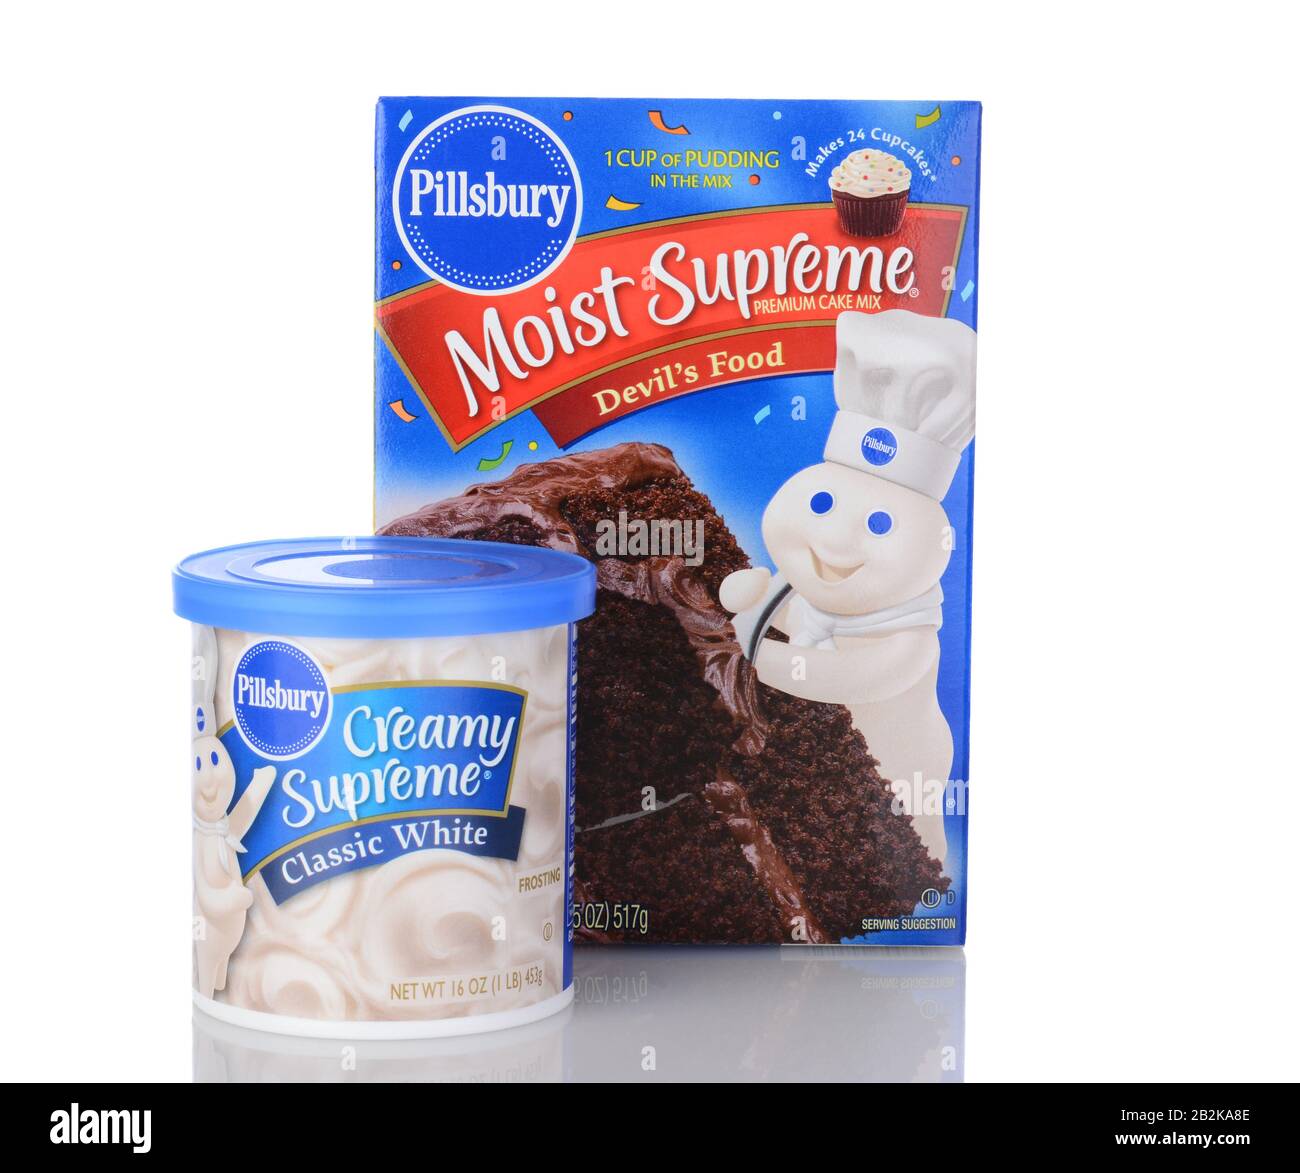 IRVINE, CA - January 05, 2014: Pillsbury Moist Supreme Devils Food Cake Mix and White Frosting. Pillsbury founded in 1872 by Charles Alfred Pillsbury, Stock Photo